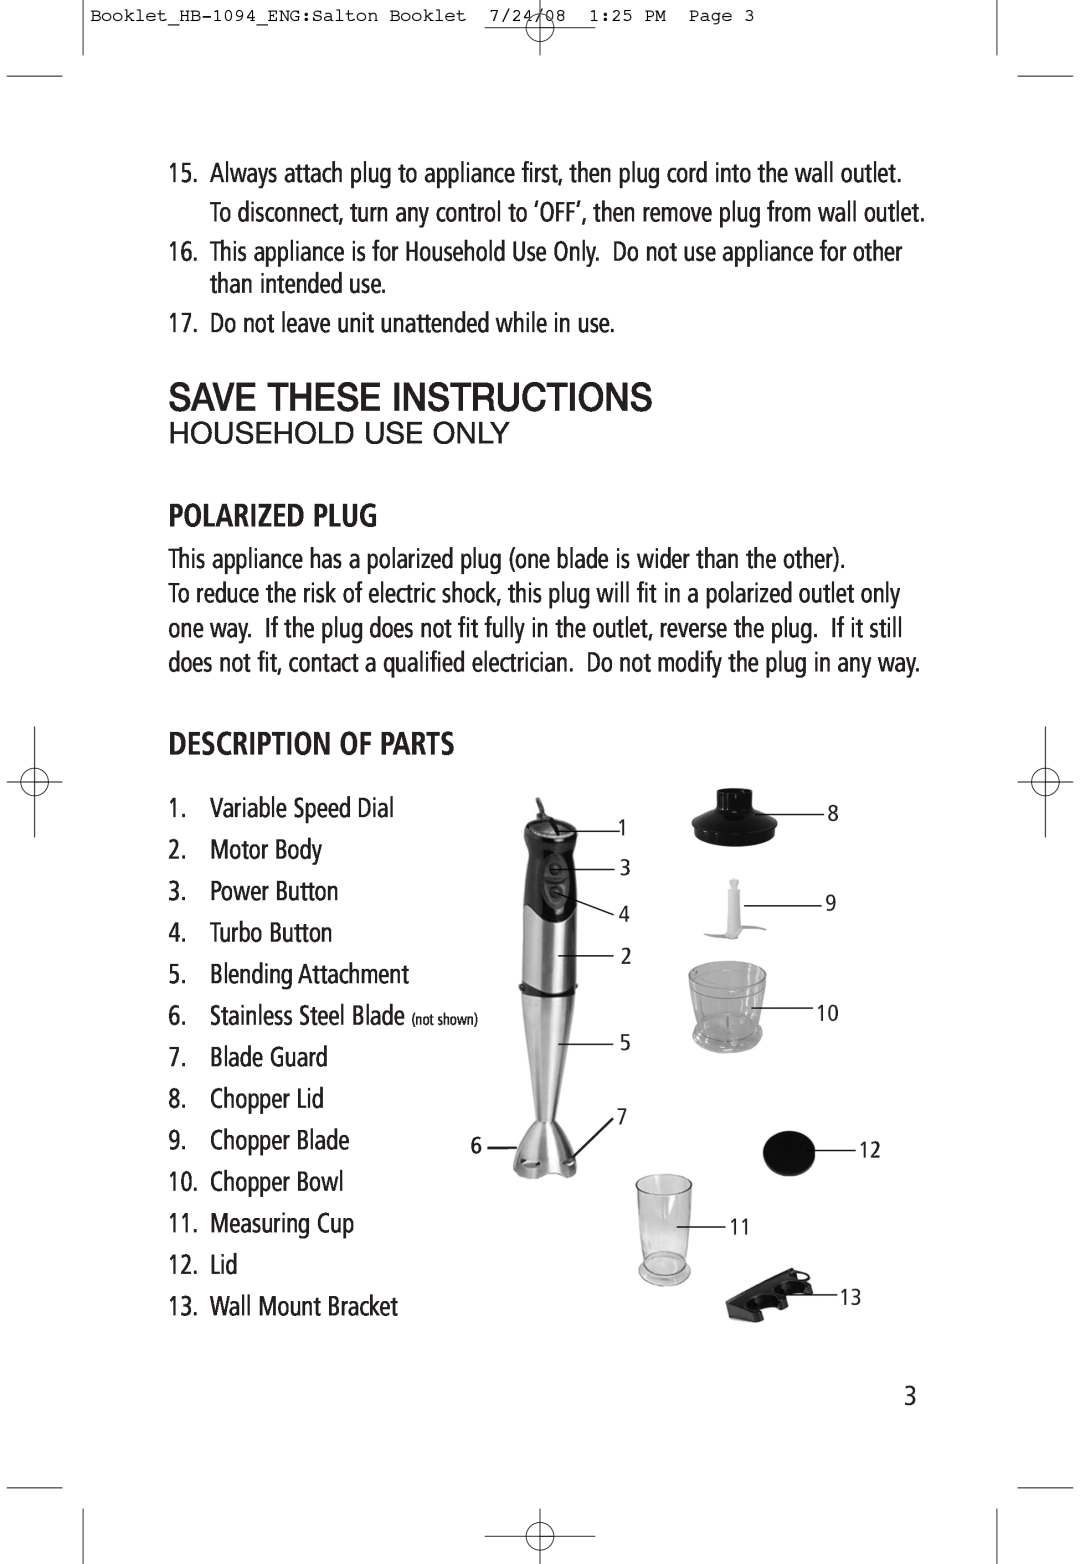 Salton HB-1094 manual Polarized Plug, Description Of Parts, Save These Instructions, Household Use Only 